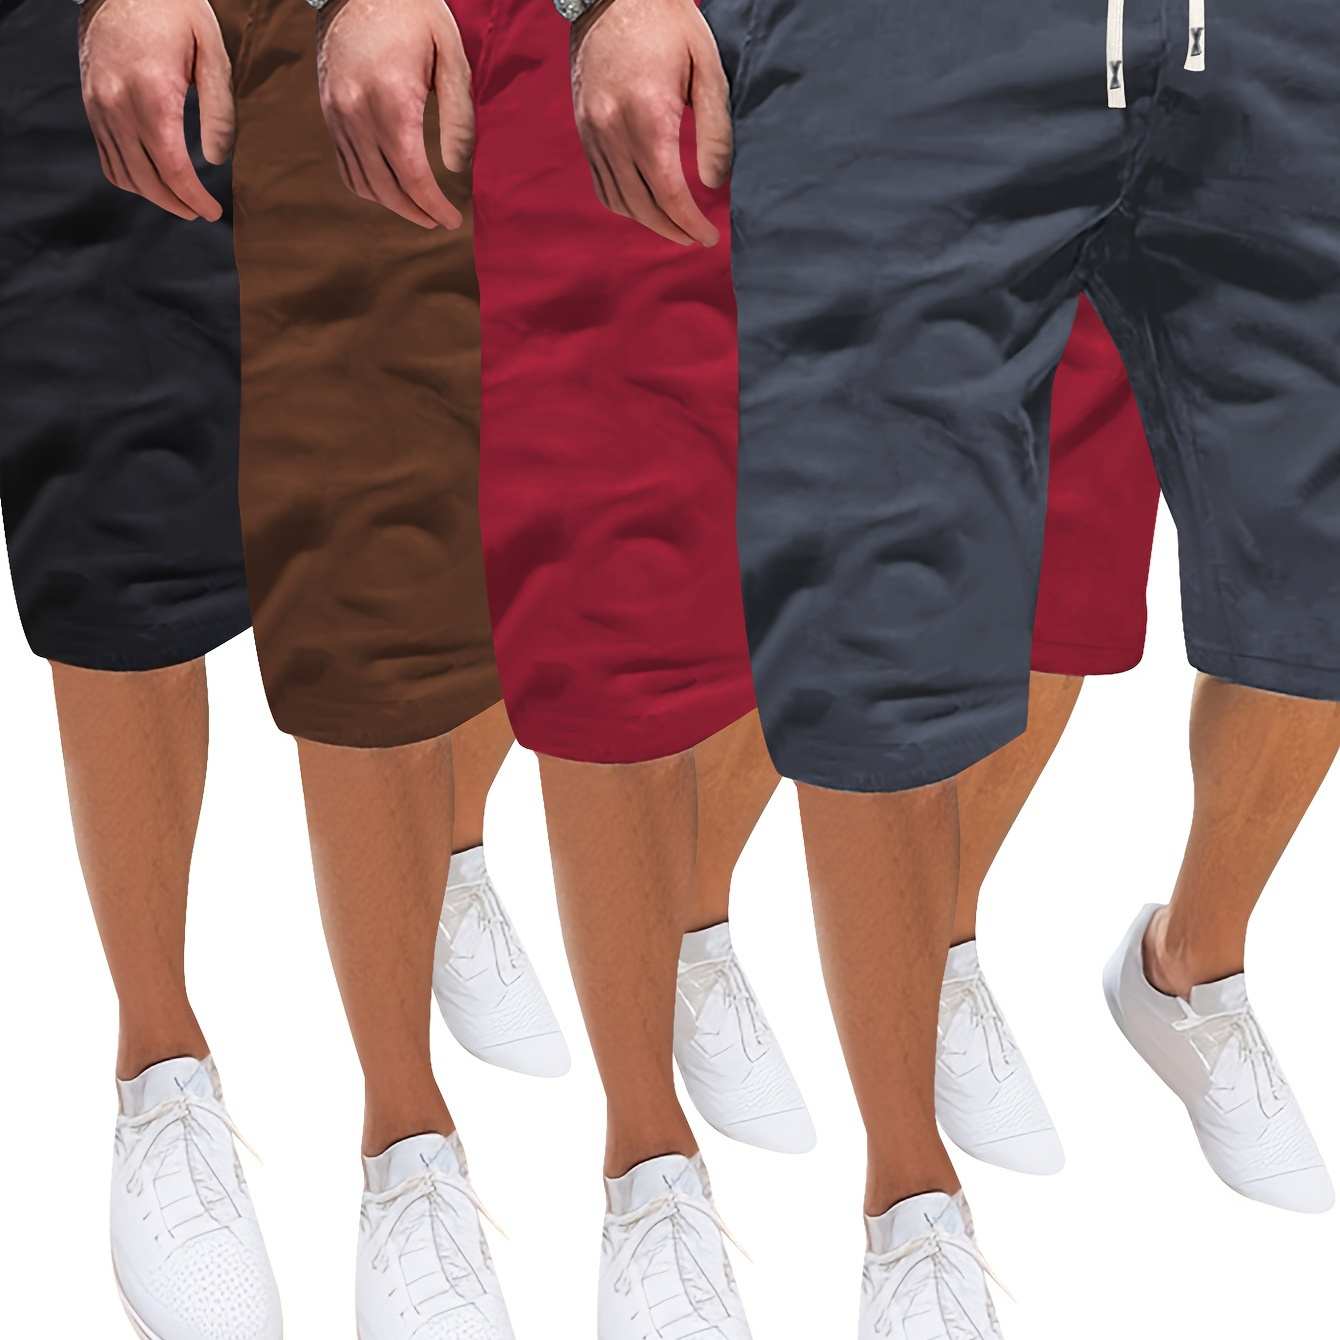 

4pcs Set Of Solid Color Shorts With Drawstring And Pockets, Casual And Comfy Sports Shorts Perfect For Men's Summer Jogging Wear And Outdoors Activities